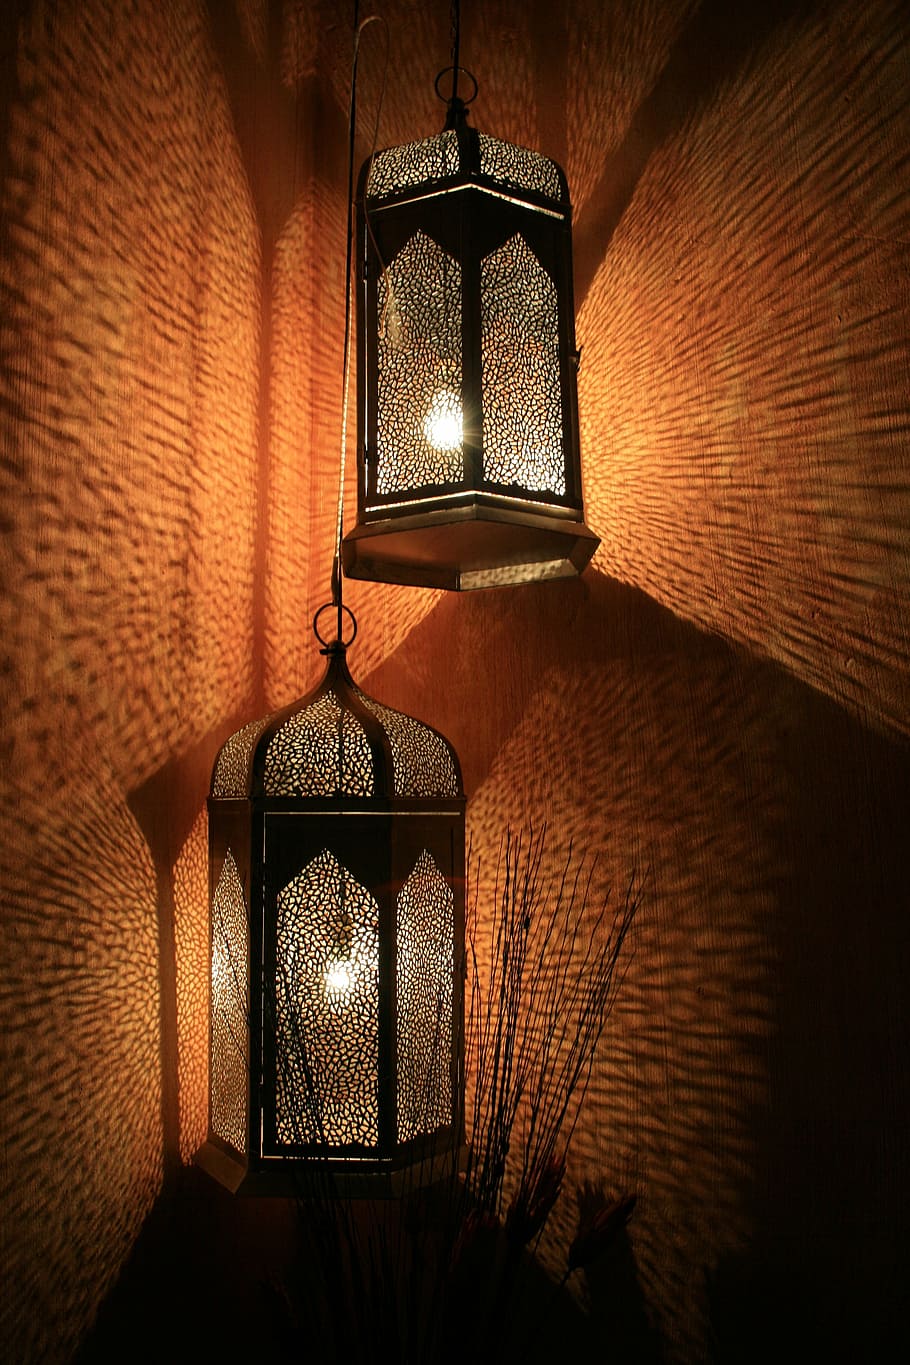 two, turned, candle lanterns, lanterns, lamps, decorative, diffused light, reflecting light, interior, wall